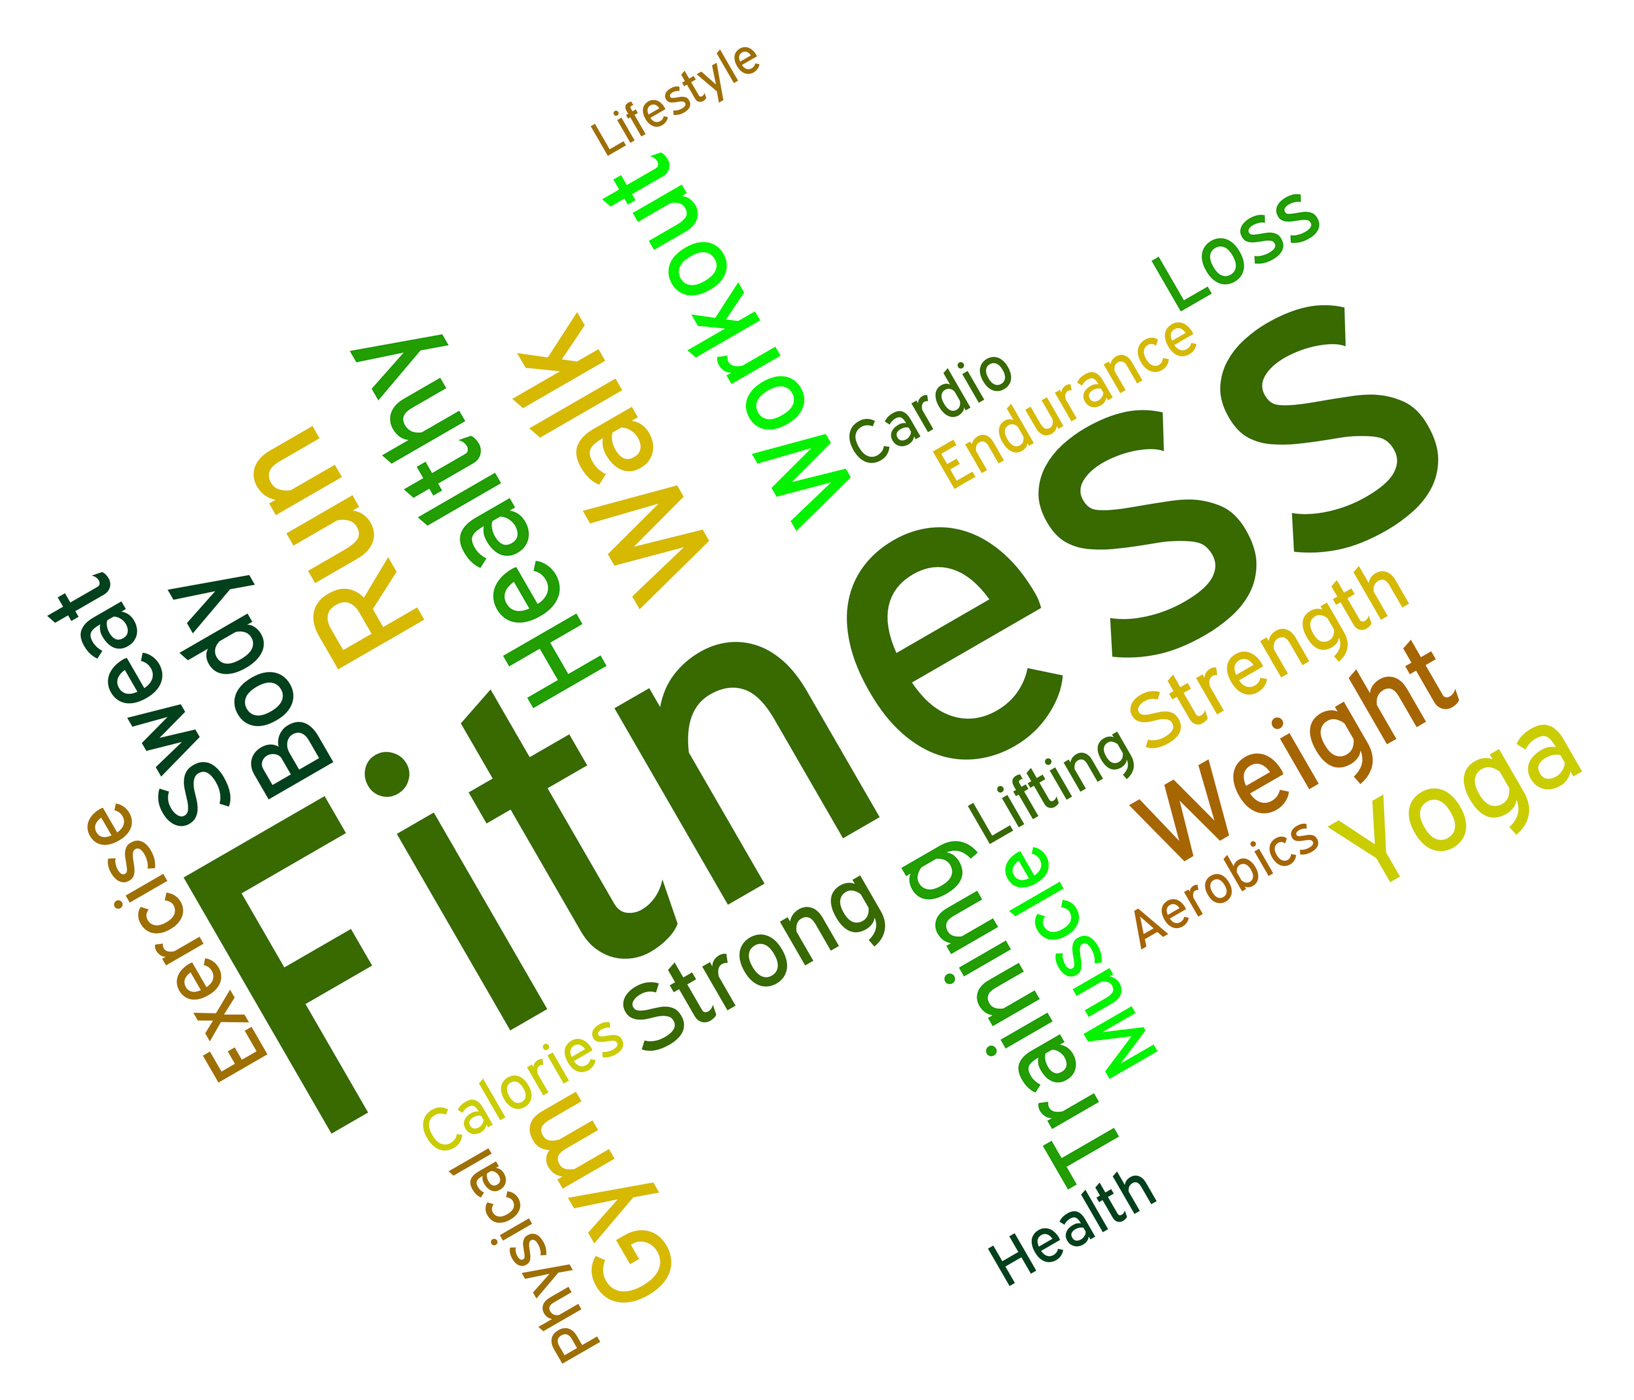 Fitness Words Means Physical Activity And Exercise, Aerobic, Train, Workingout, Work-out, HQ Photo